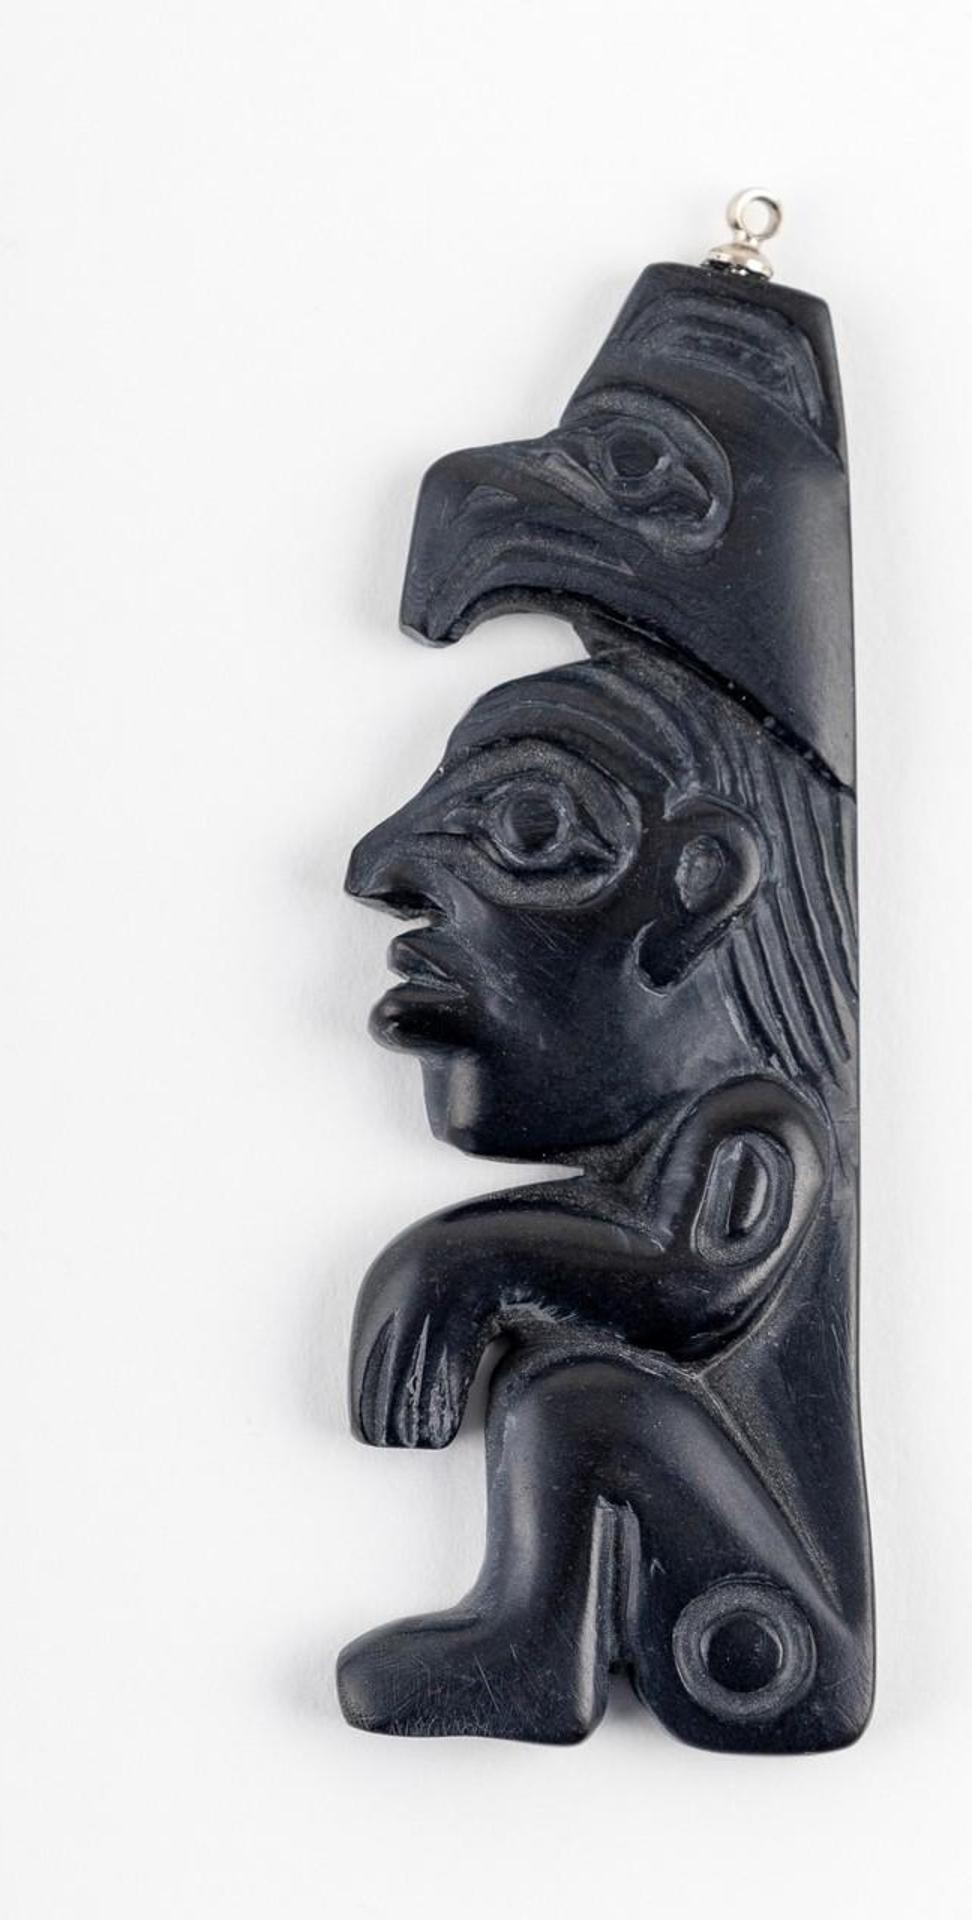 Greg White - a carved argillite pendant depicting a seated figure with a Raven atop his head